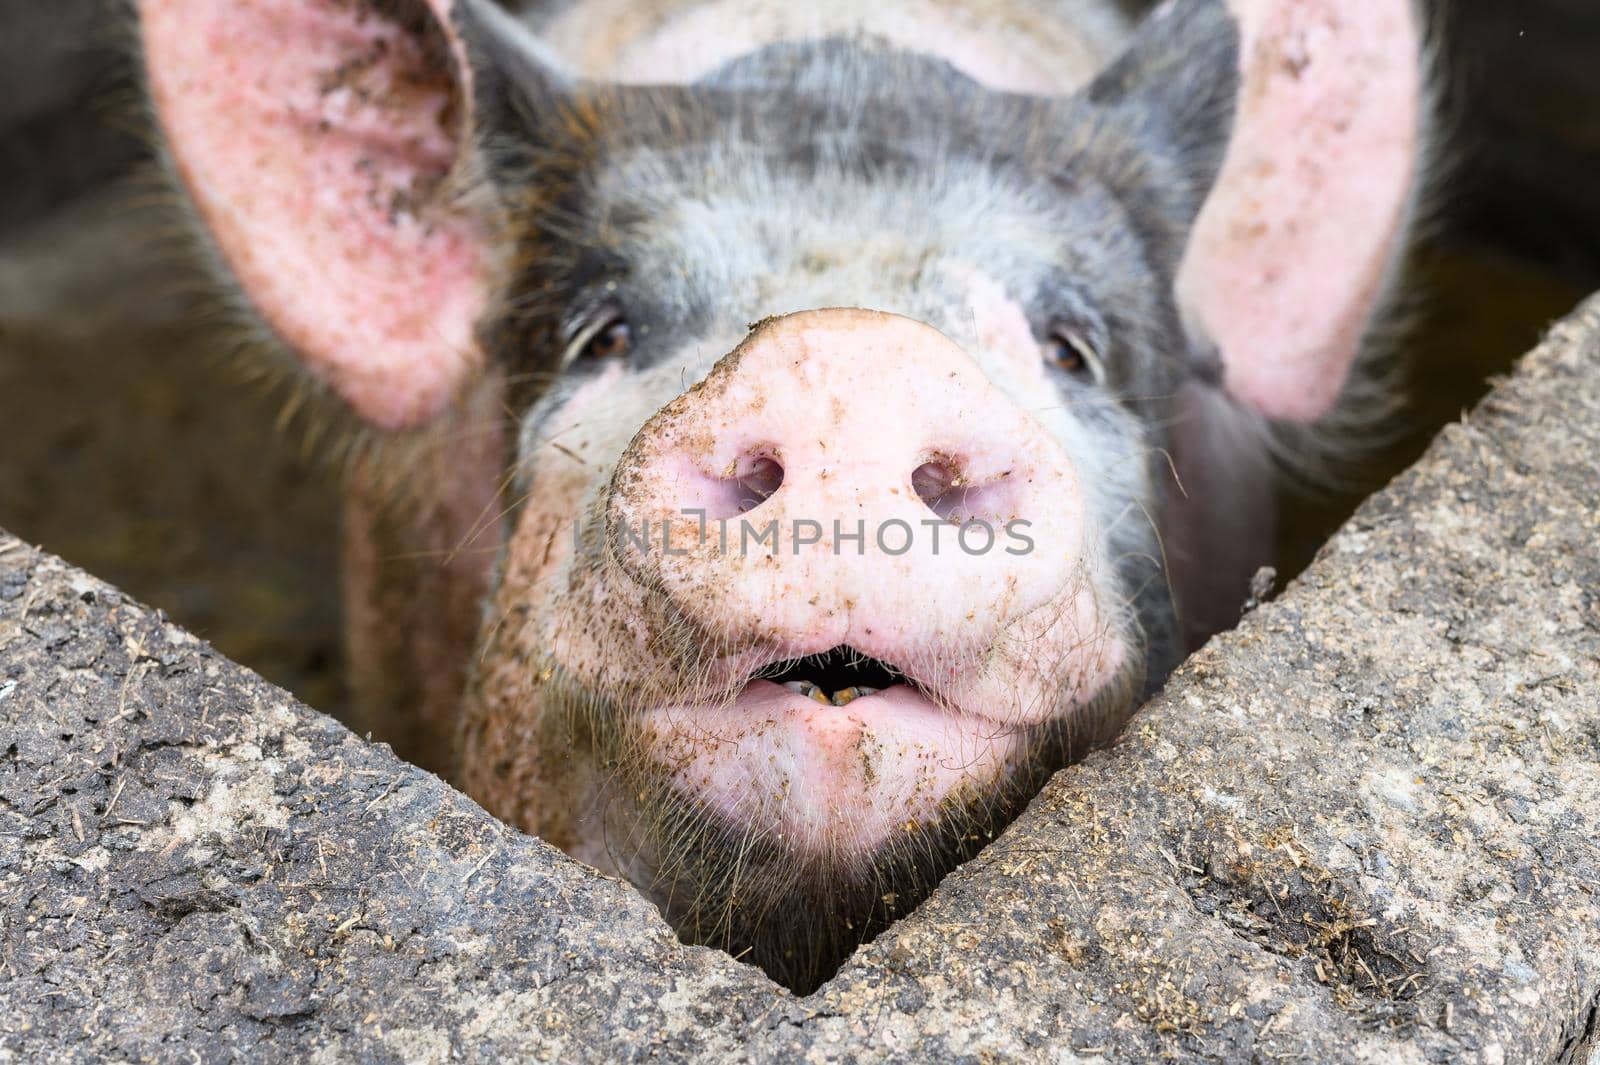 Big pig on a farm in a pigsty. by Peruphotoart